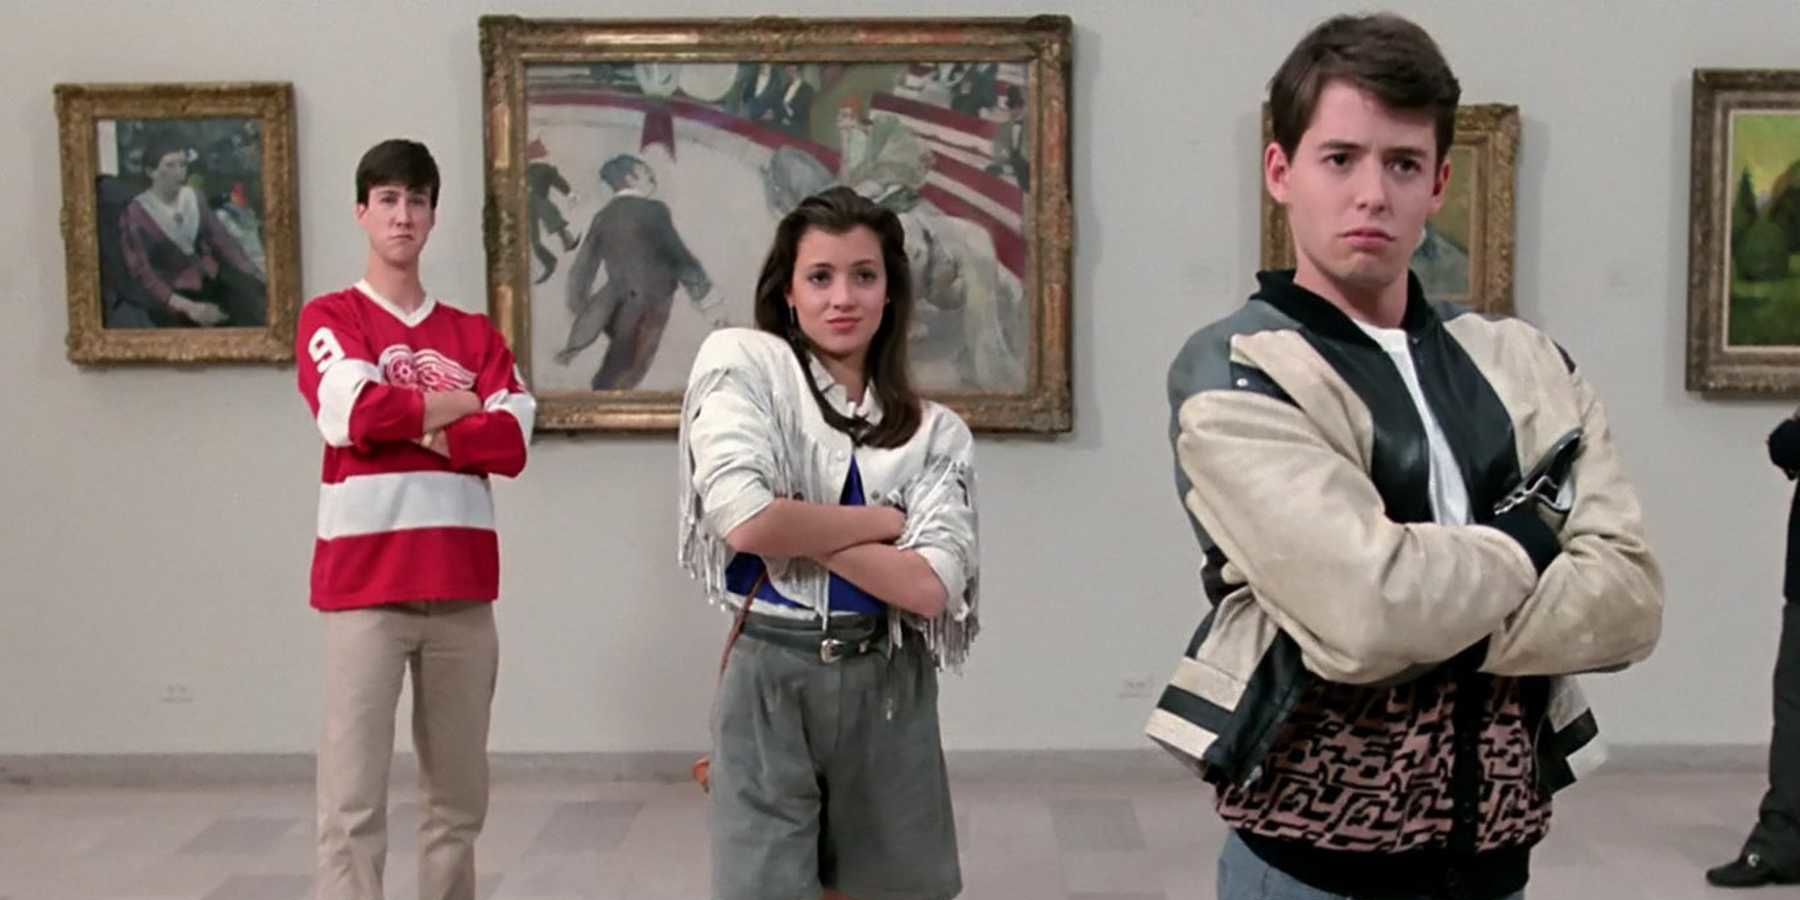 Ferris, Sloane, and Cameron at the art gallery in Ferris Bueller's Day Off.